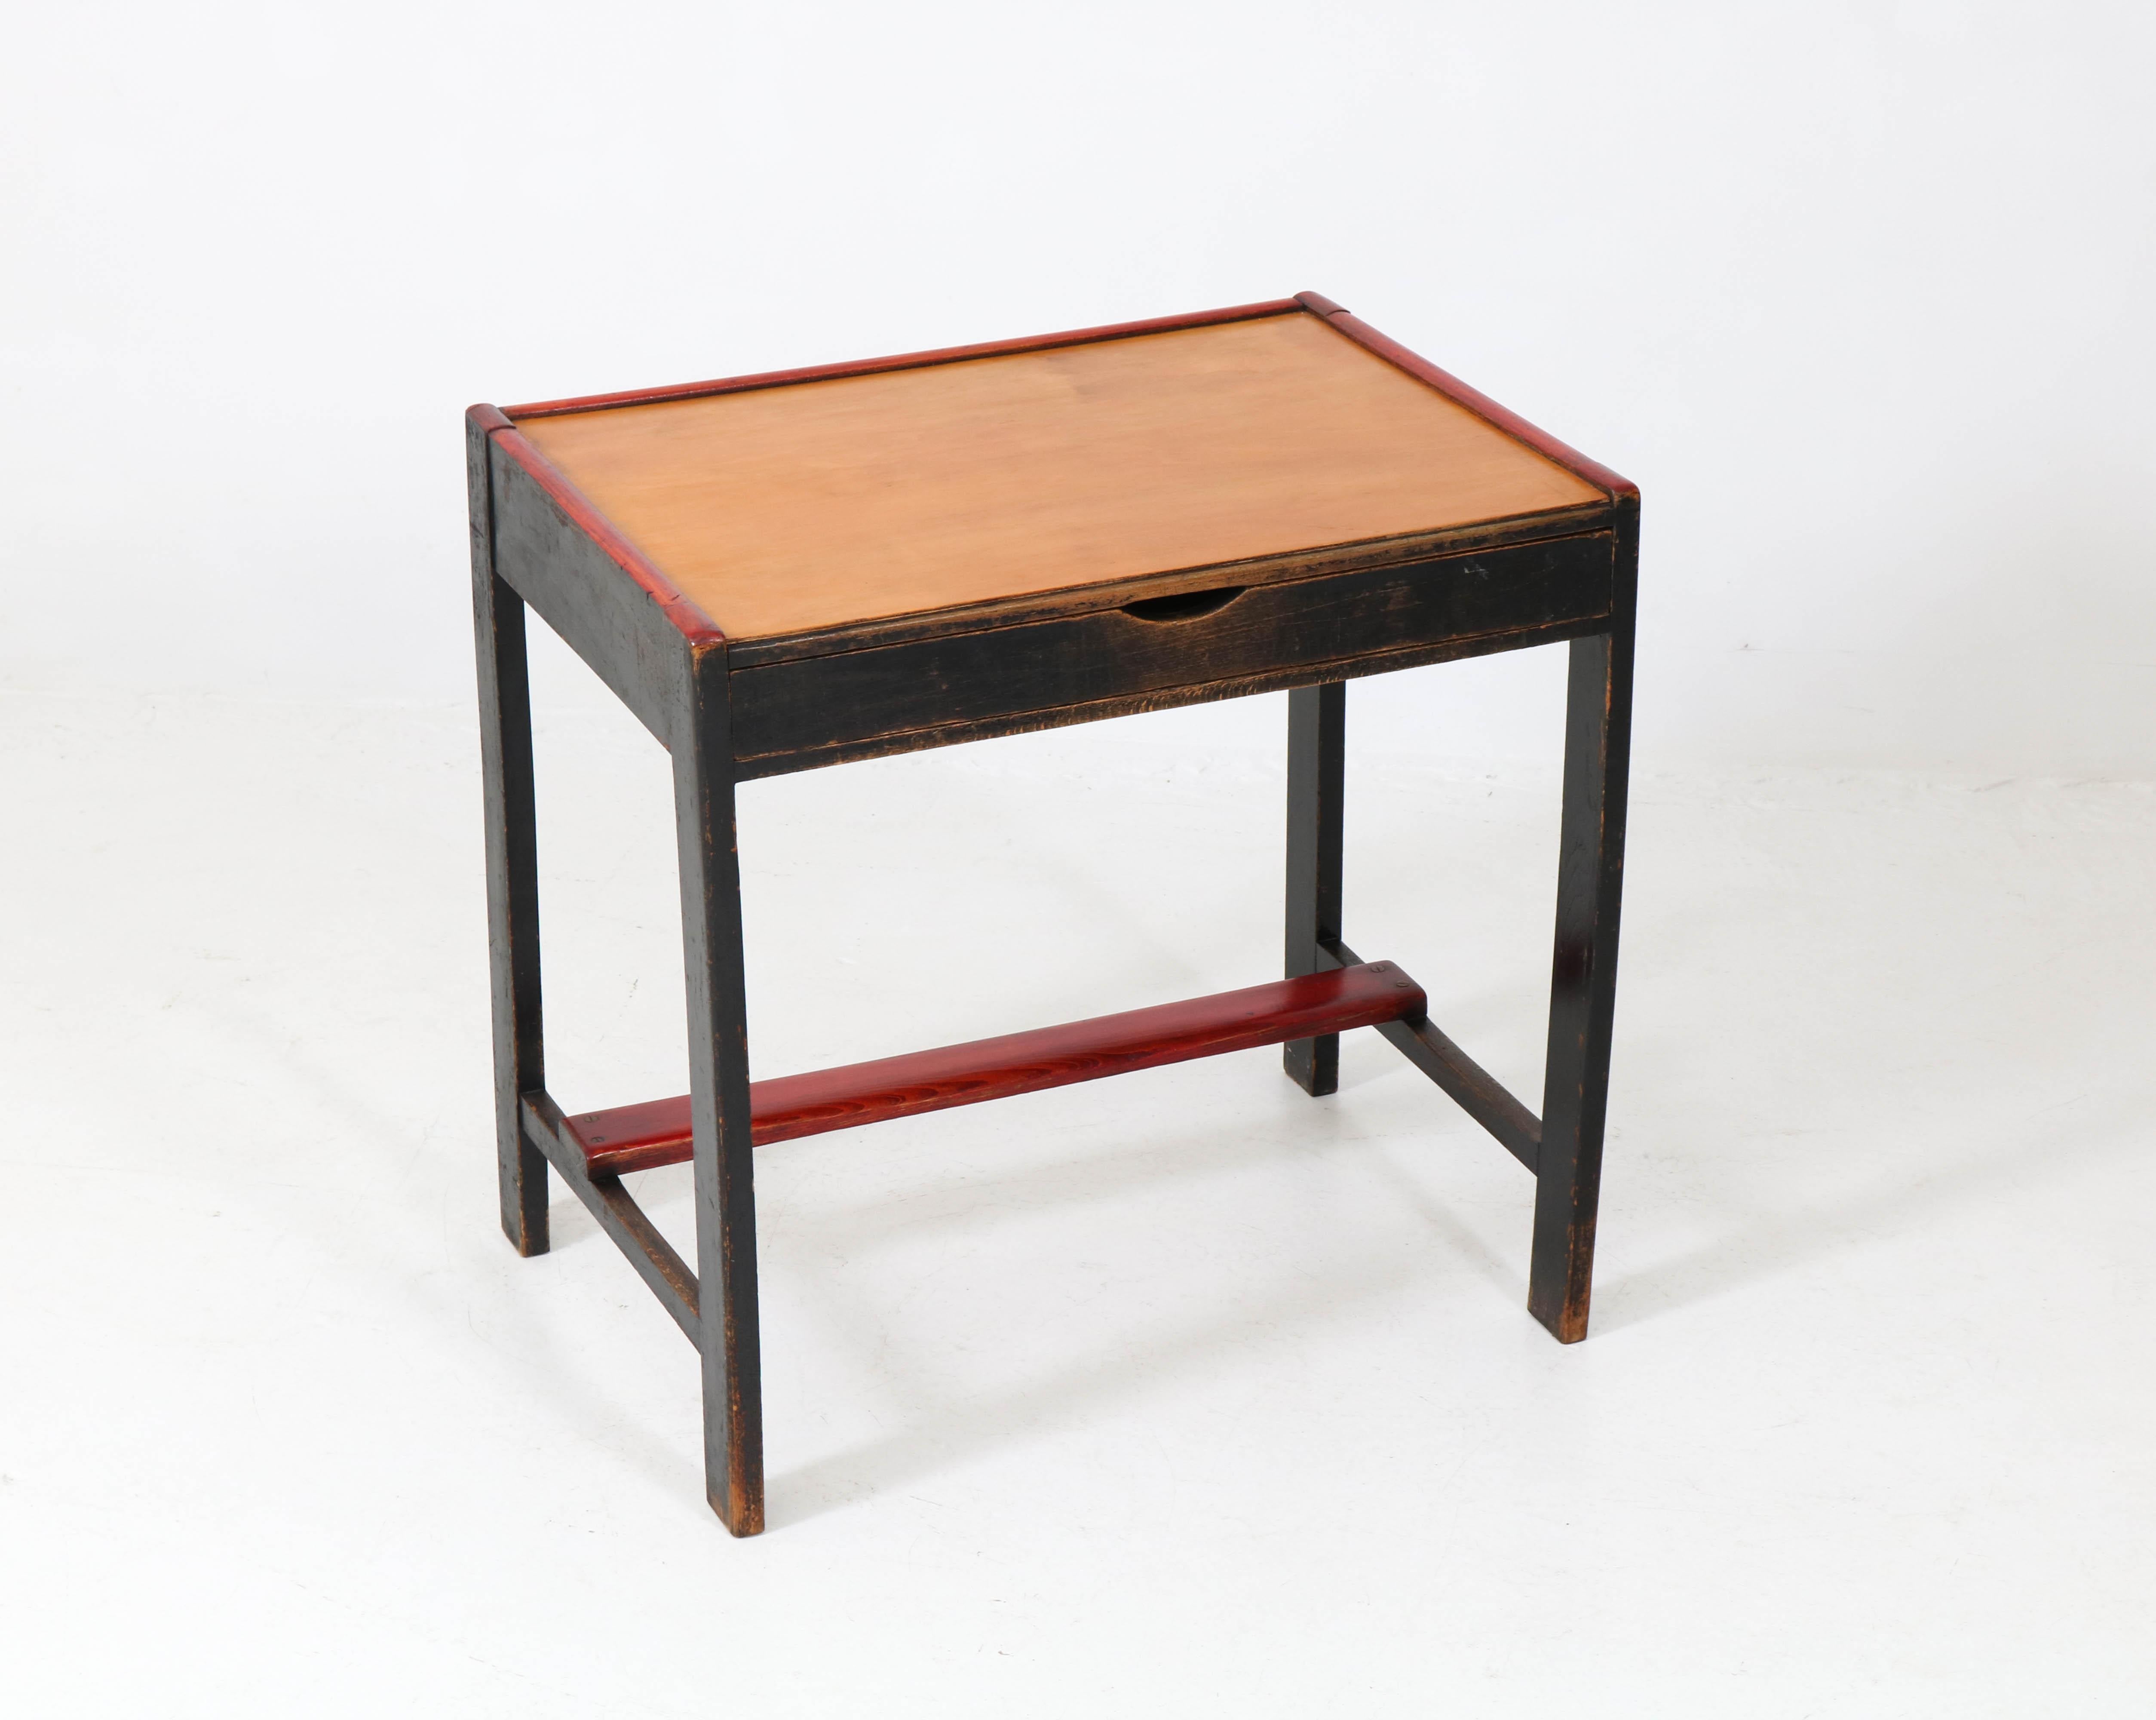 Early 20th Century Lacquered Art Deco Haagse School Children's Table and Armchair by Cor Alons